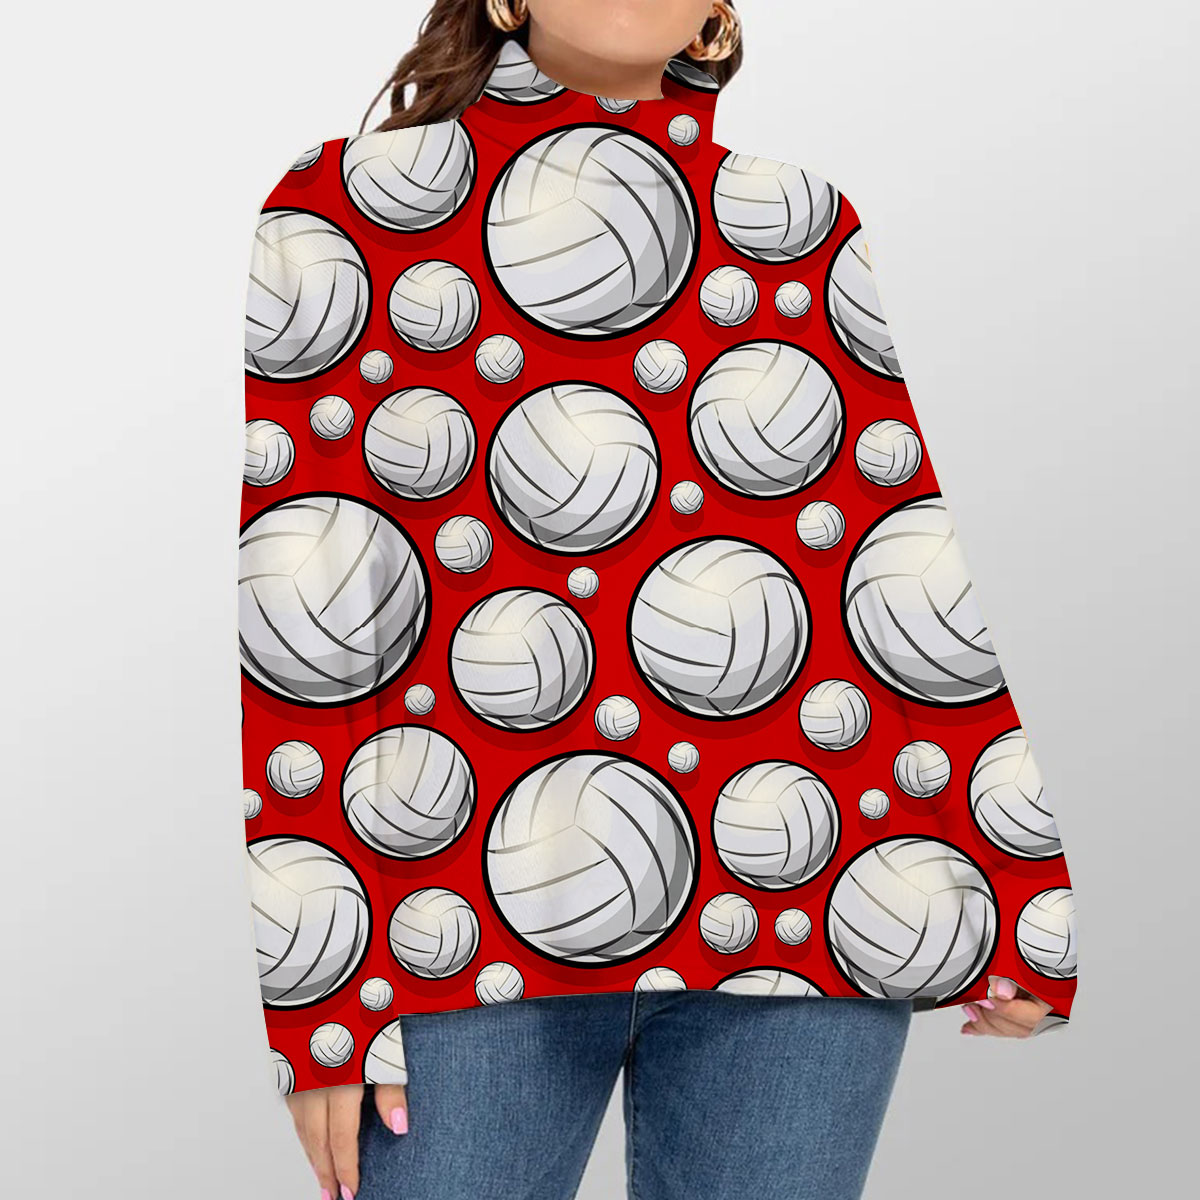 Red Volleyball Turtleneck Sweater